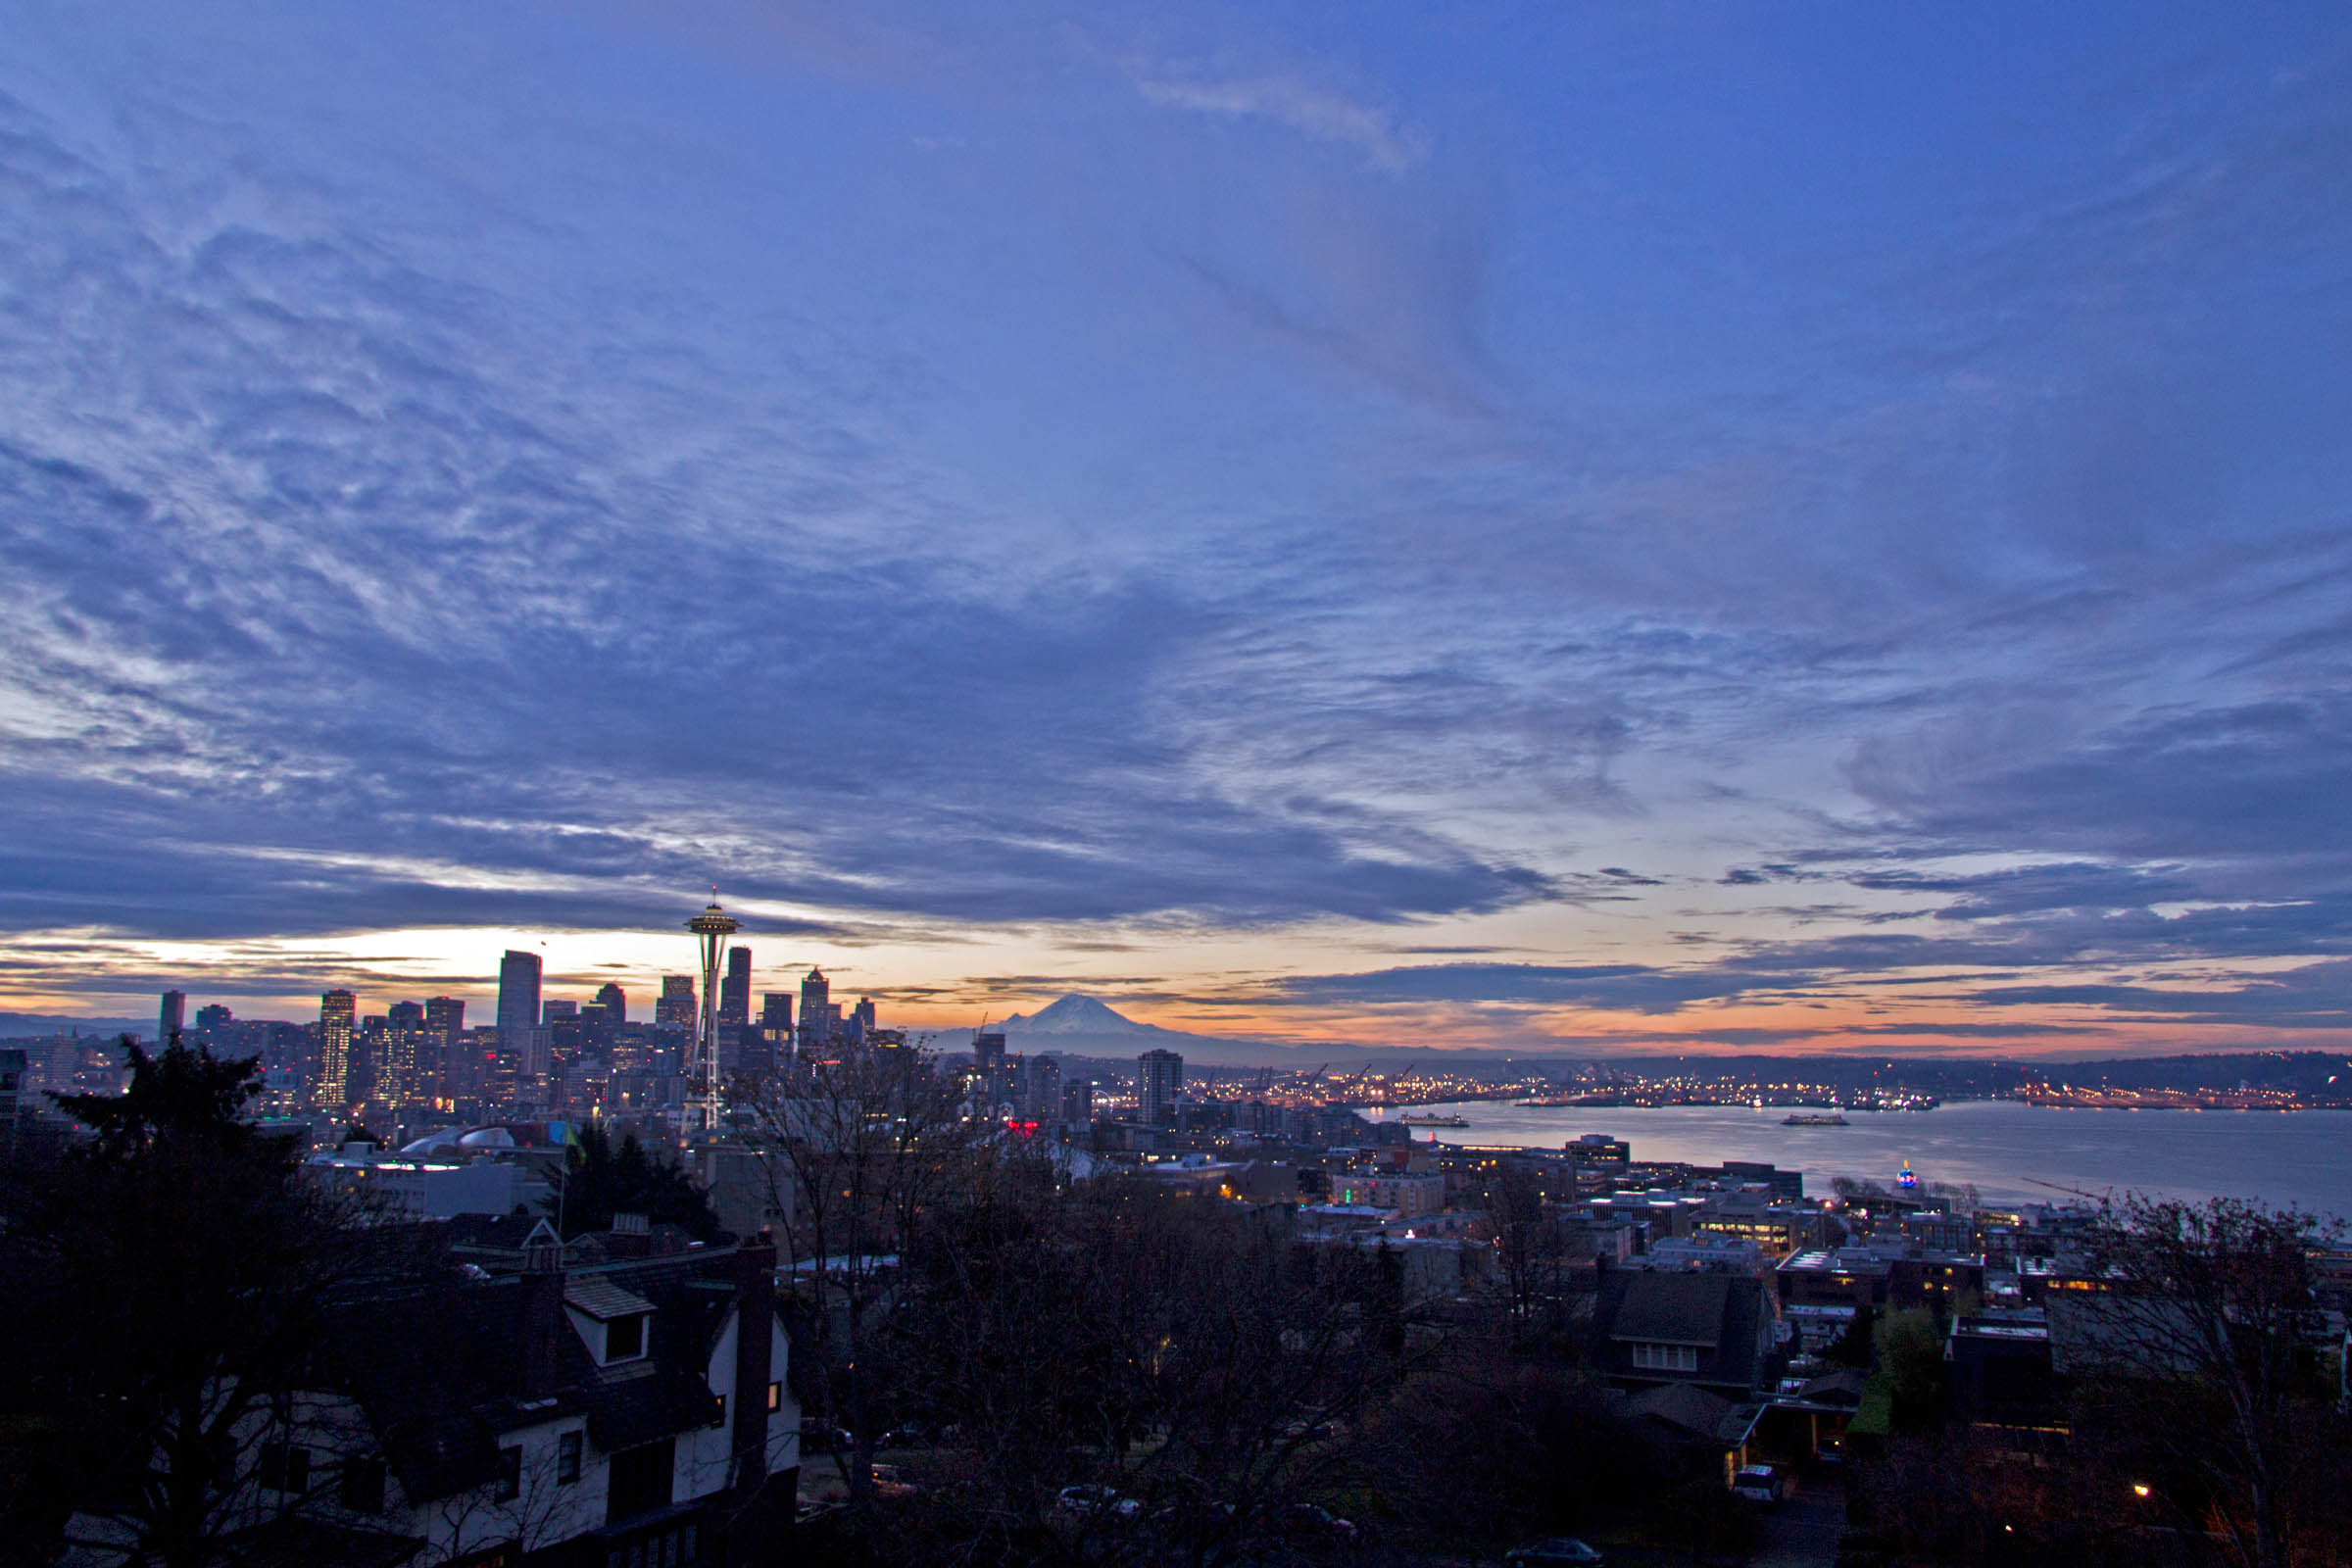 View of Puget Sound from Kerry Park, Seattle, WA, USA, 2013.